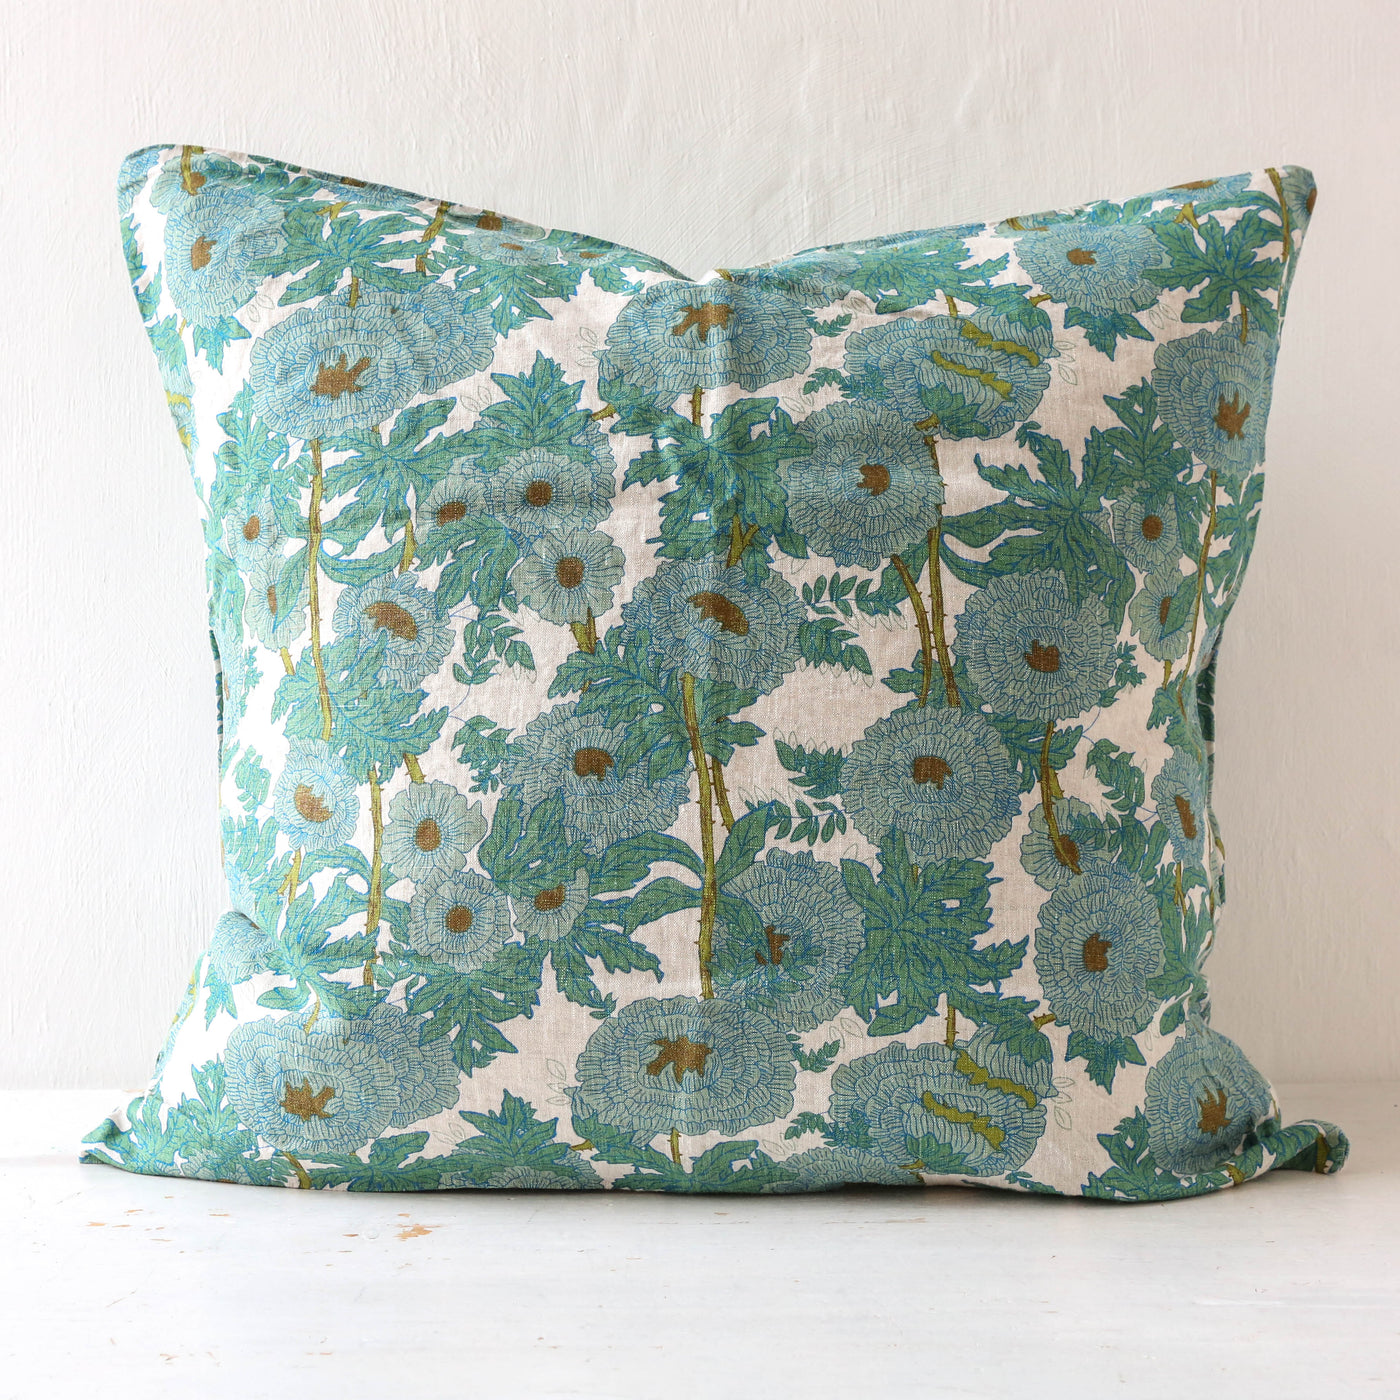 Joan's Floral Cushion Cover